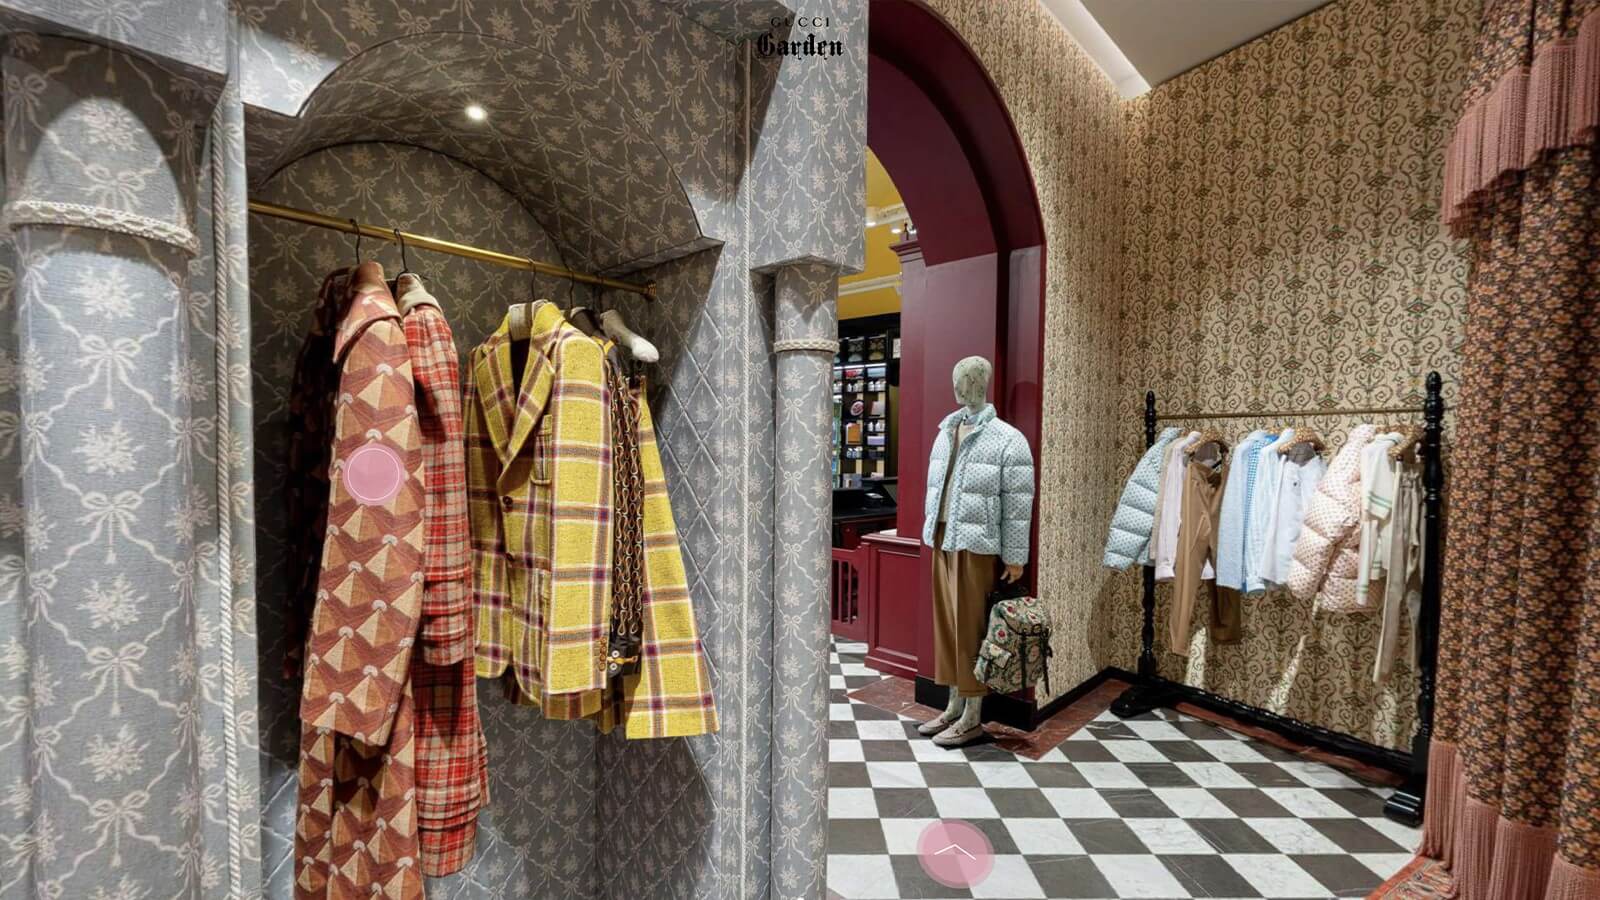 A 3D Virtual space image used as part of a digital marketing strategy for gucci